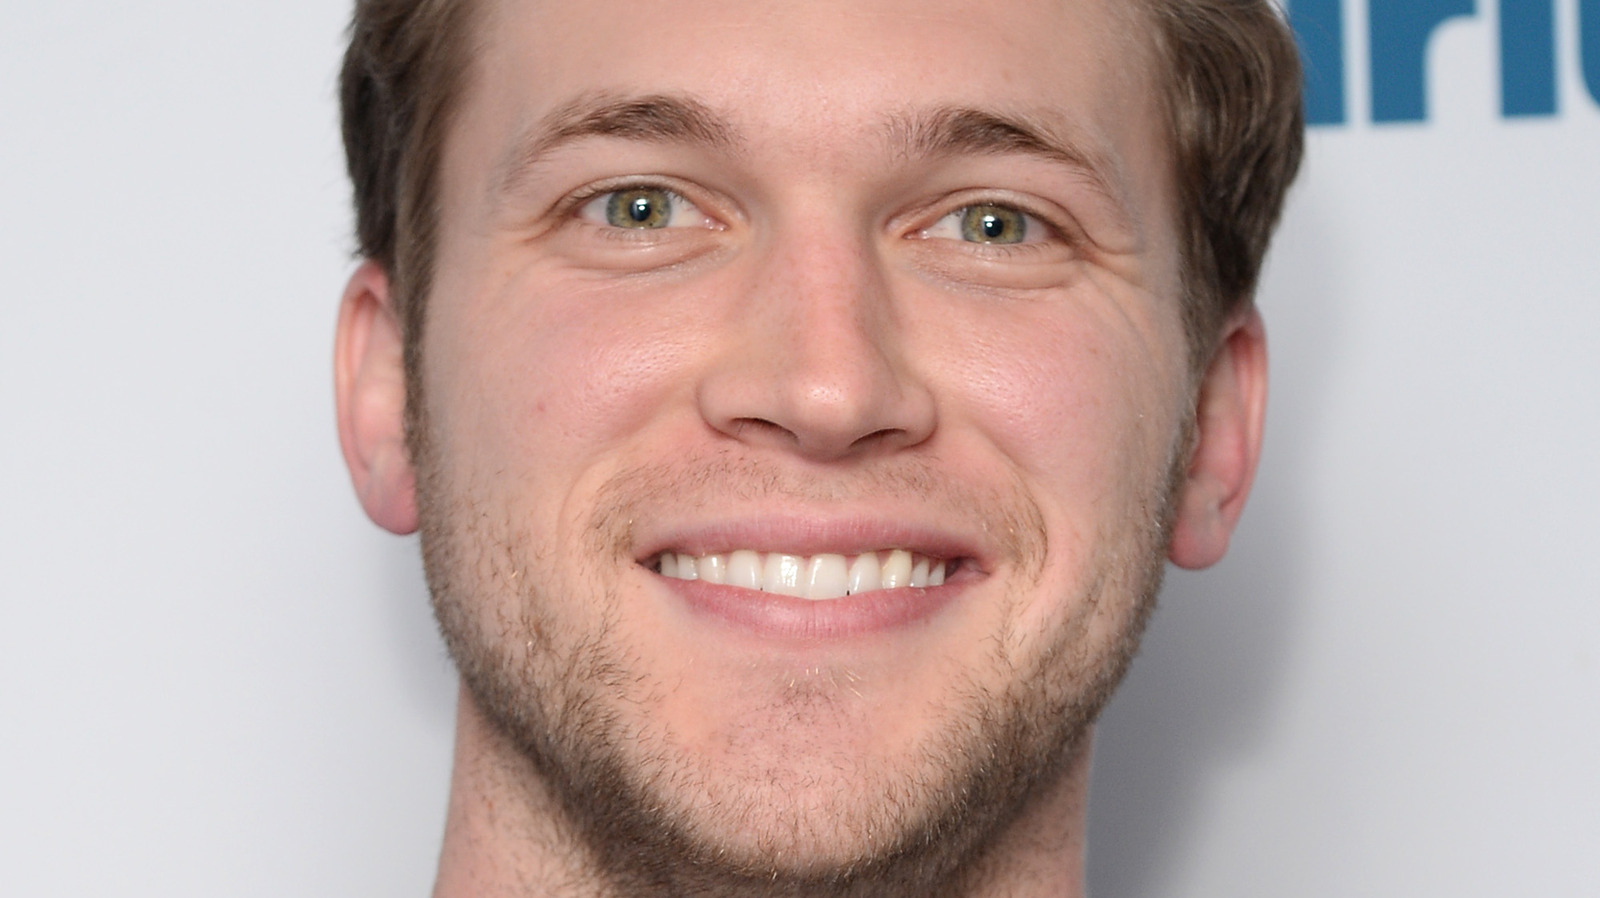 What happened to Phillip Phillips after American Idol was over?